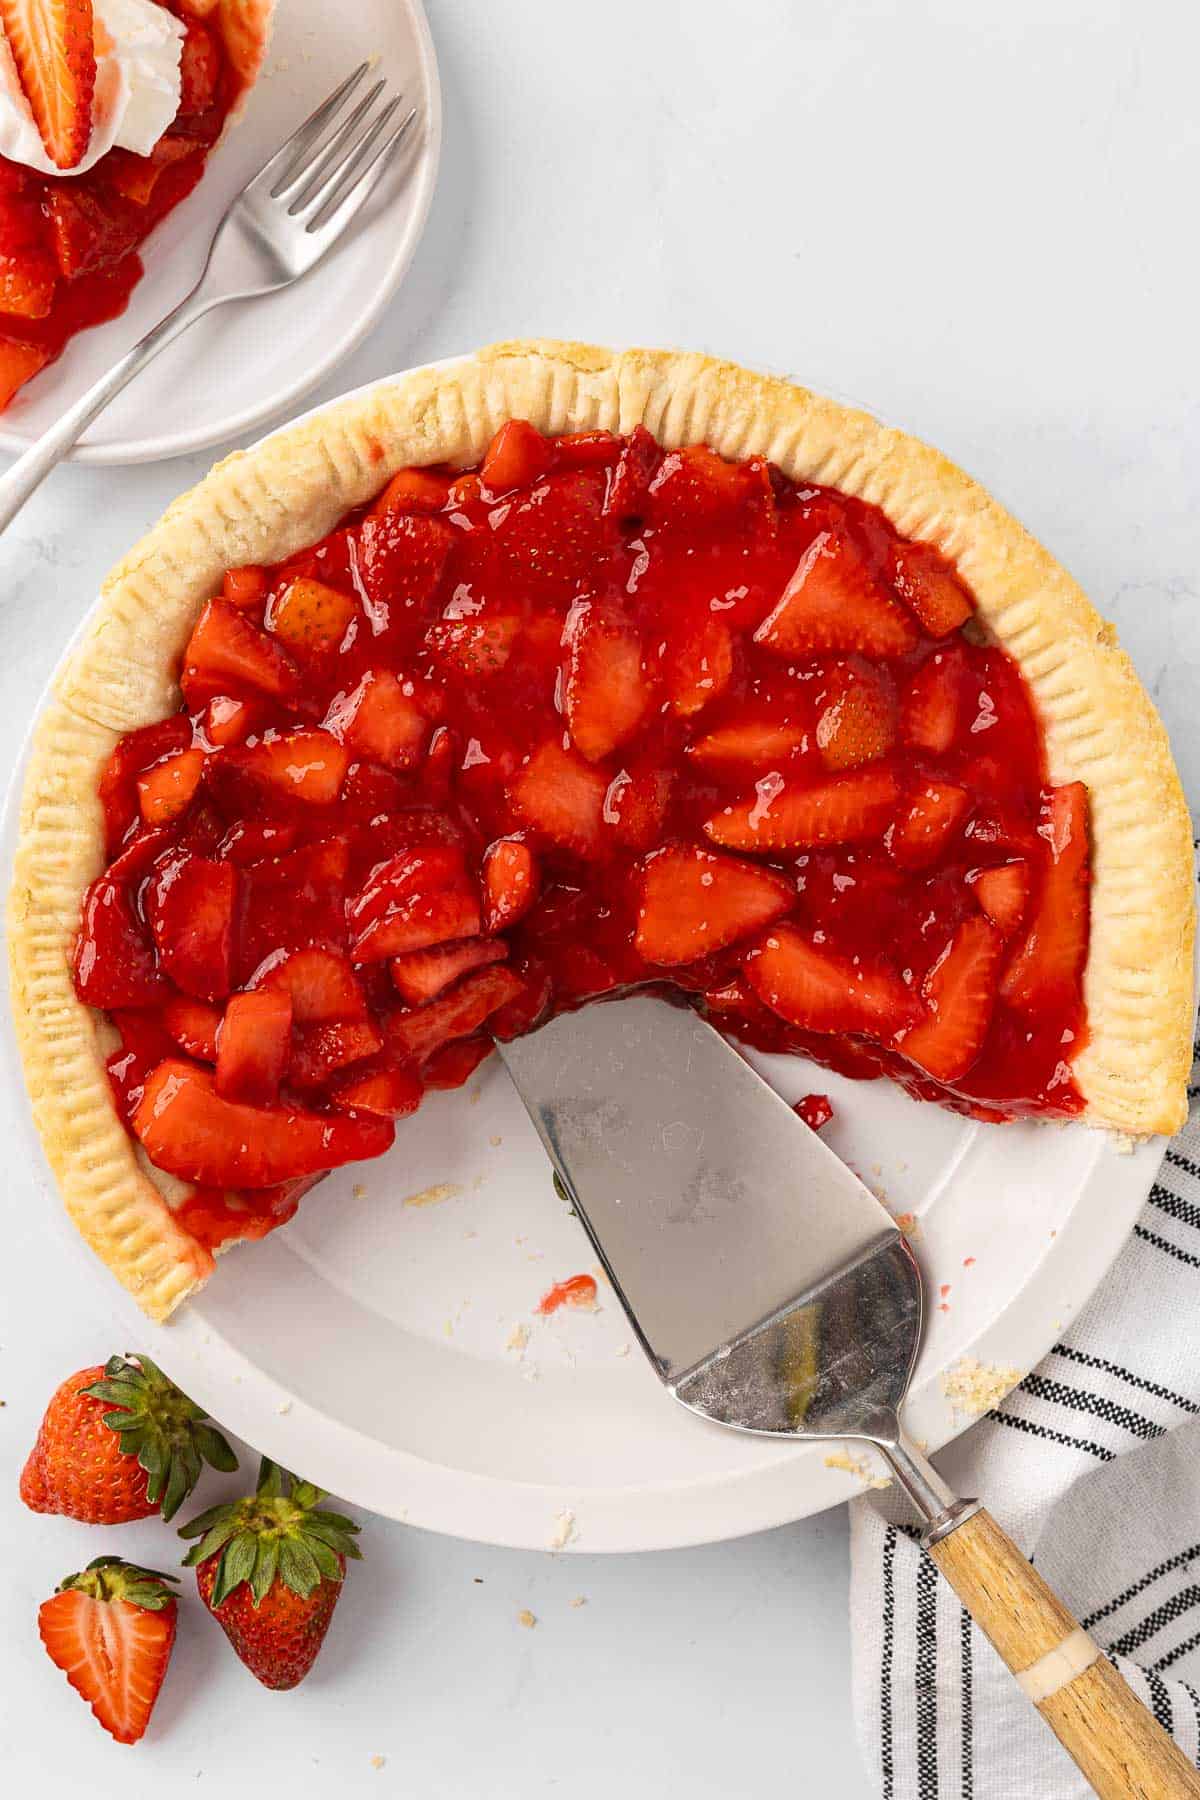 Strawberry pie in a pie tin with a few slices scooped out and a spatula ready to serve more; fresh strawberries and a slice on a small plate nearby.